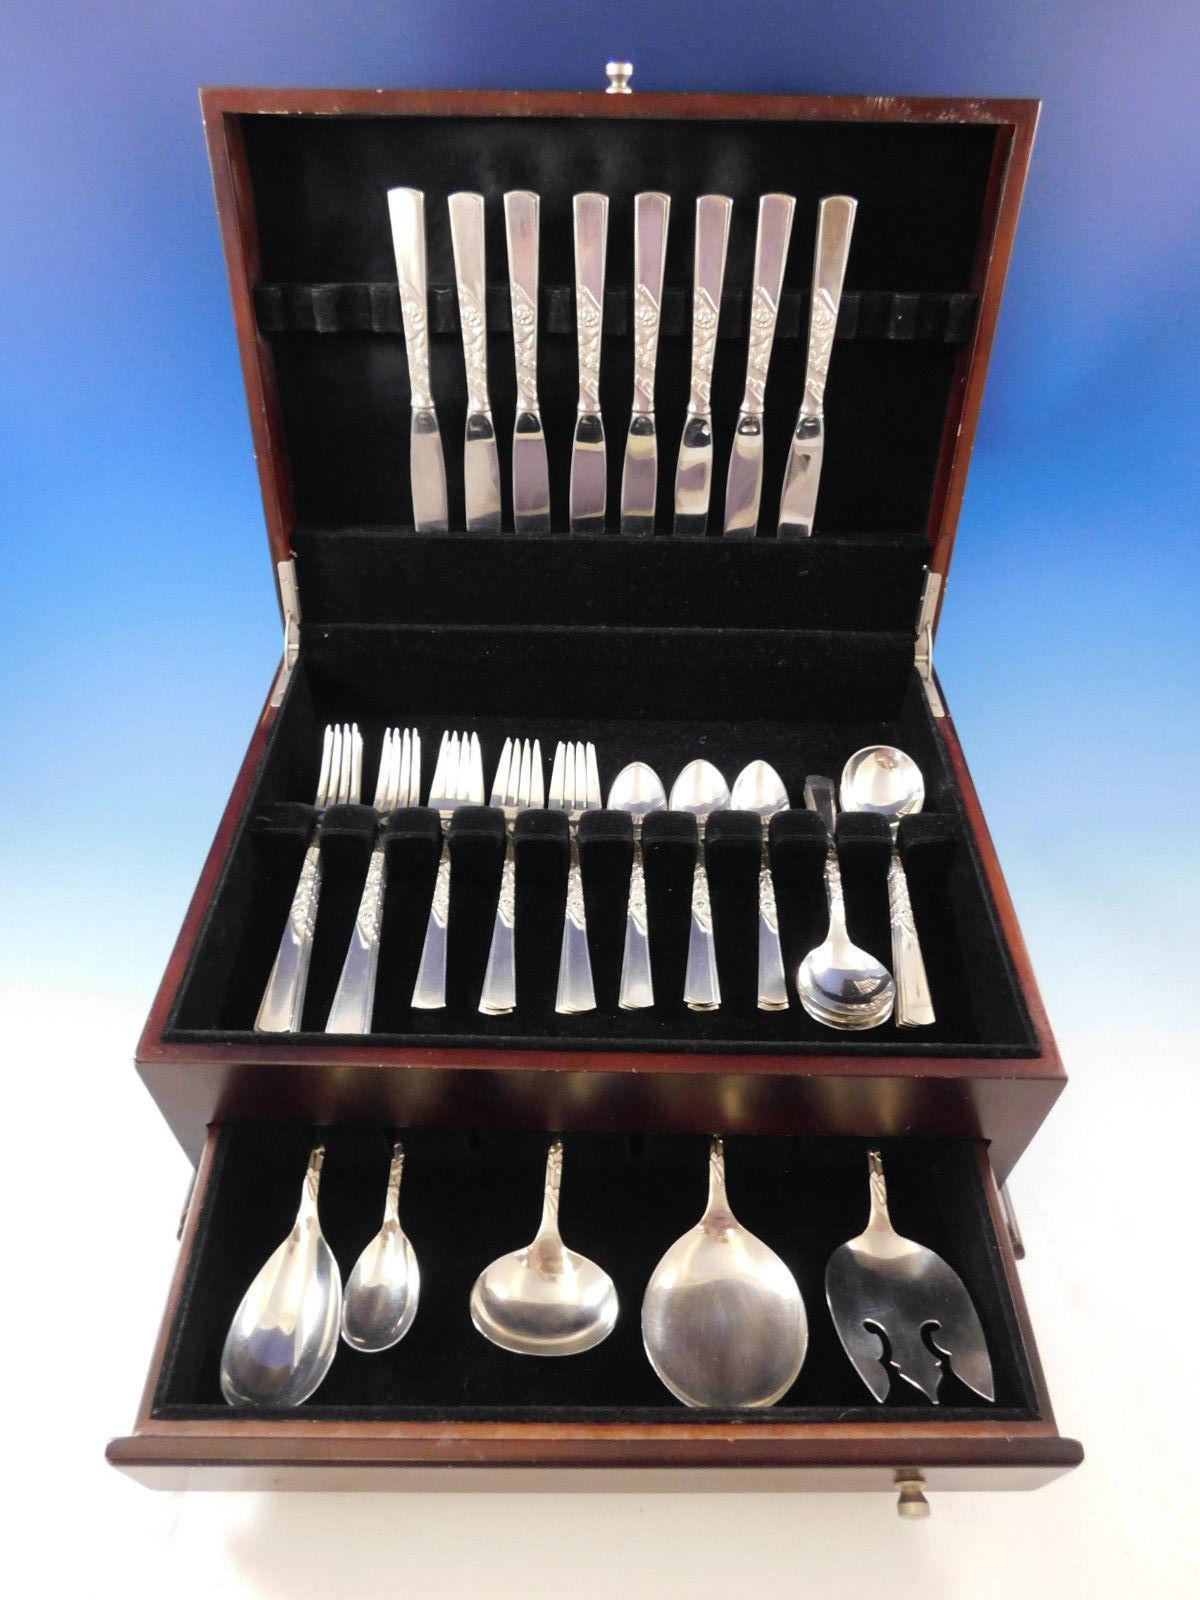 Rose motif by Stieff sterling silver flatware set, 45 pieces. This set includes:

Eight knives, 9